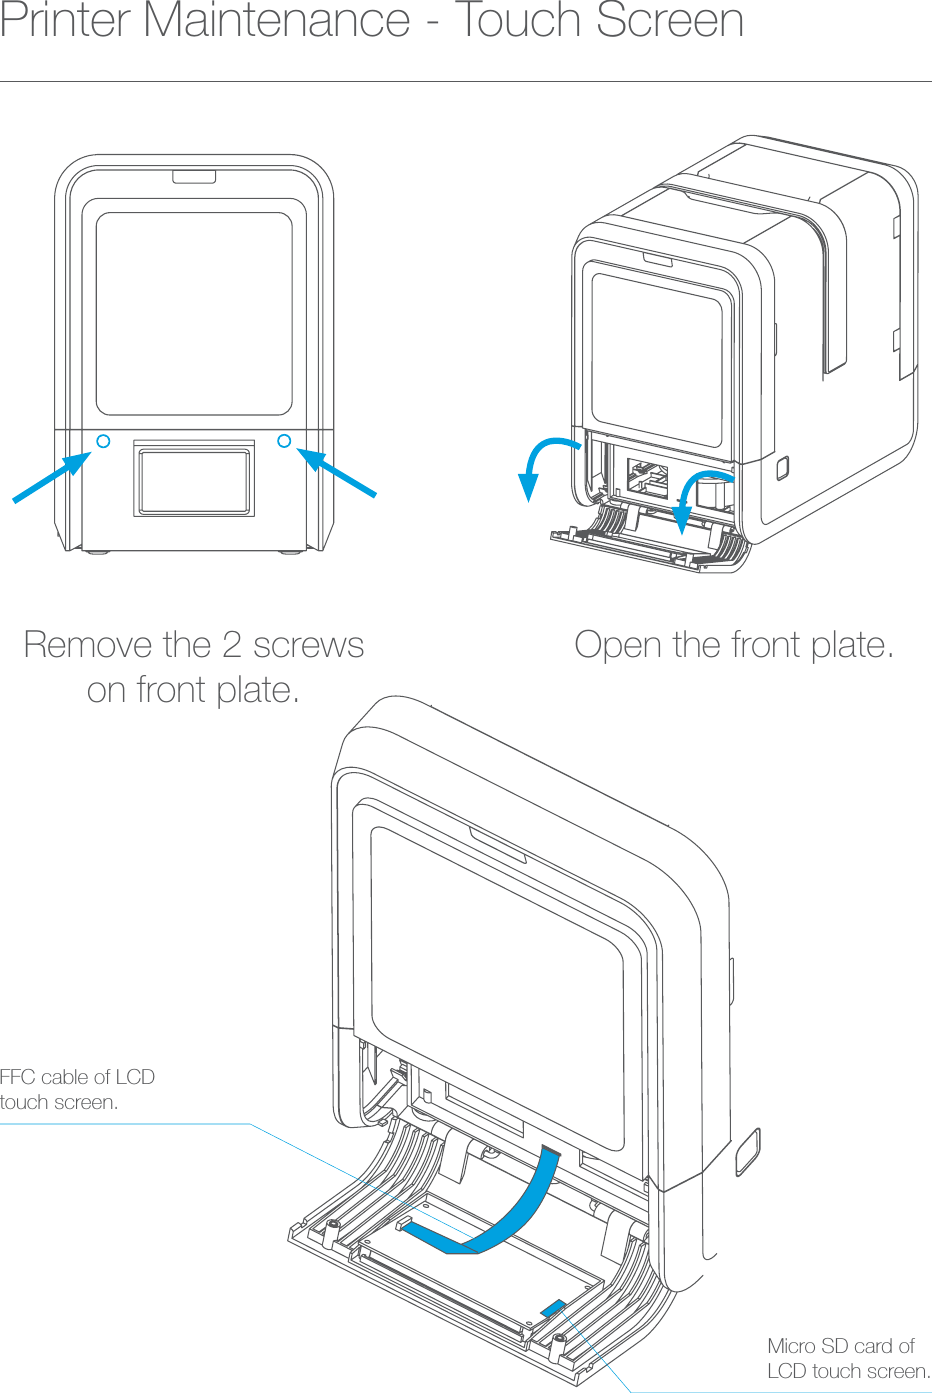 Printer Maintenance - Touch ScreenRemove the 2 screwson front plate.FFC cable of LCDtouch screen.Micro SD card ofLCD touch screen.Open the front plate.